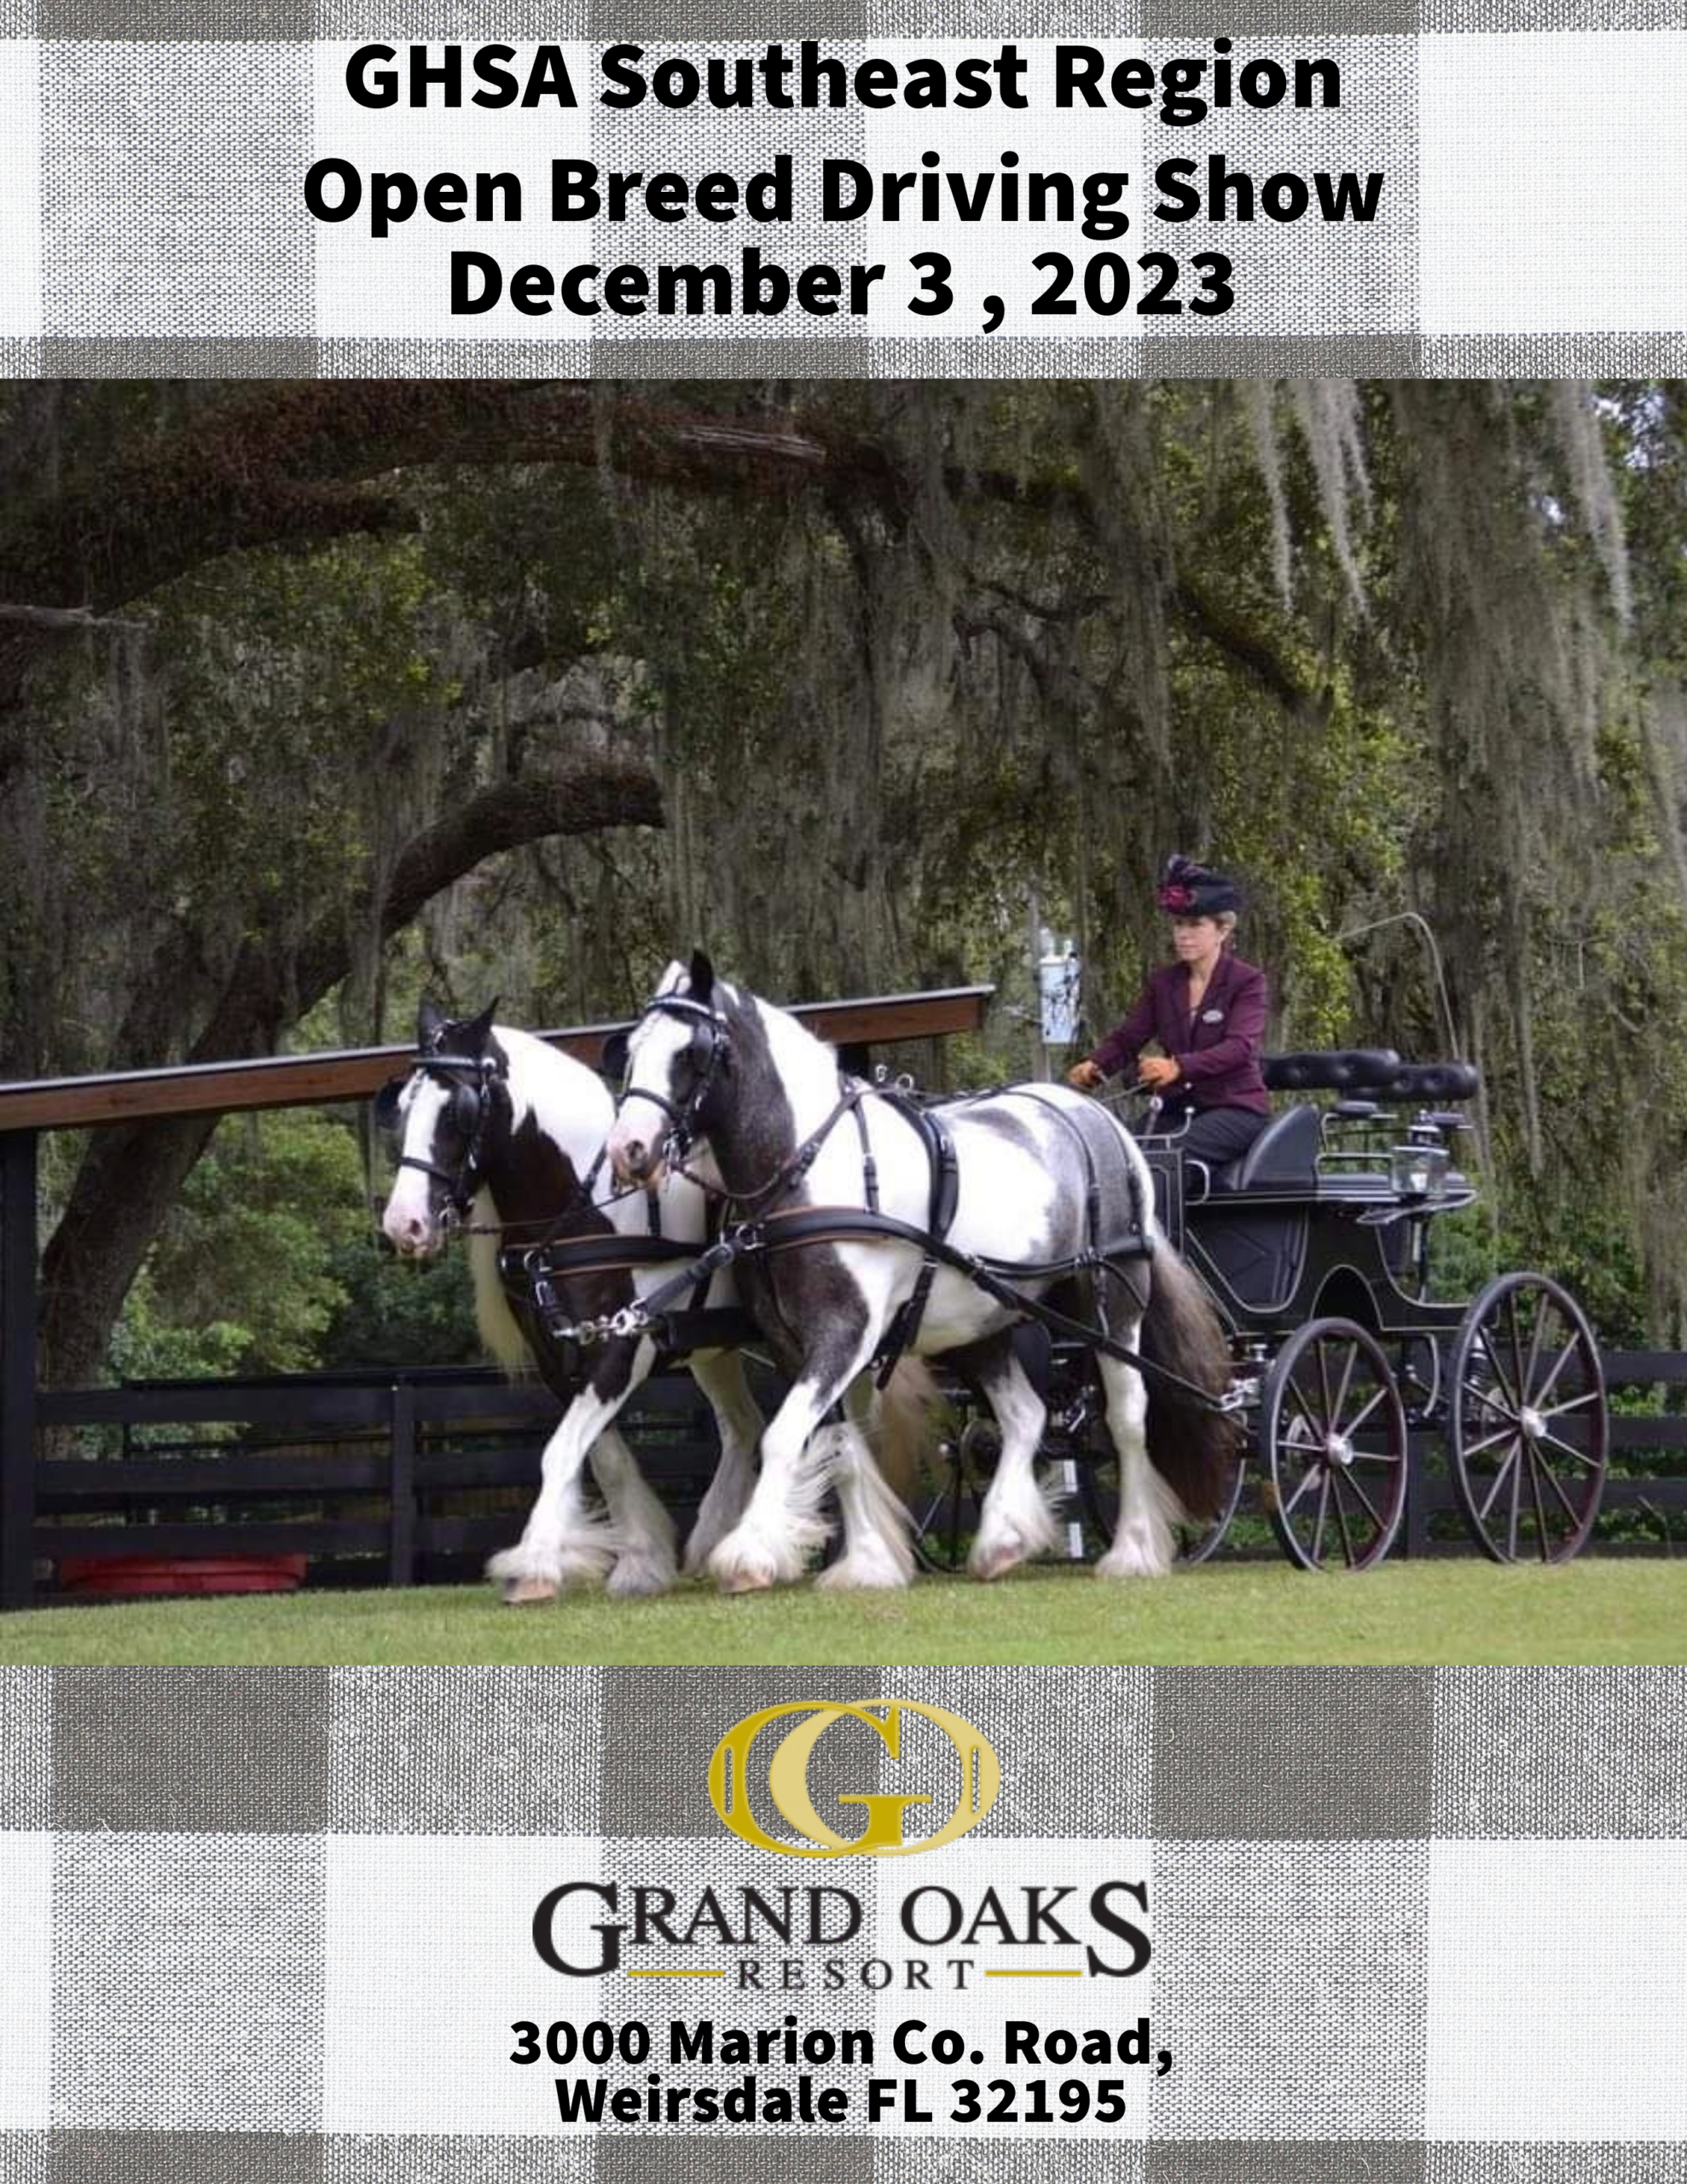 Open Breed driving Show at the Grand Oaks Resort